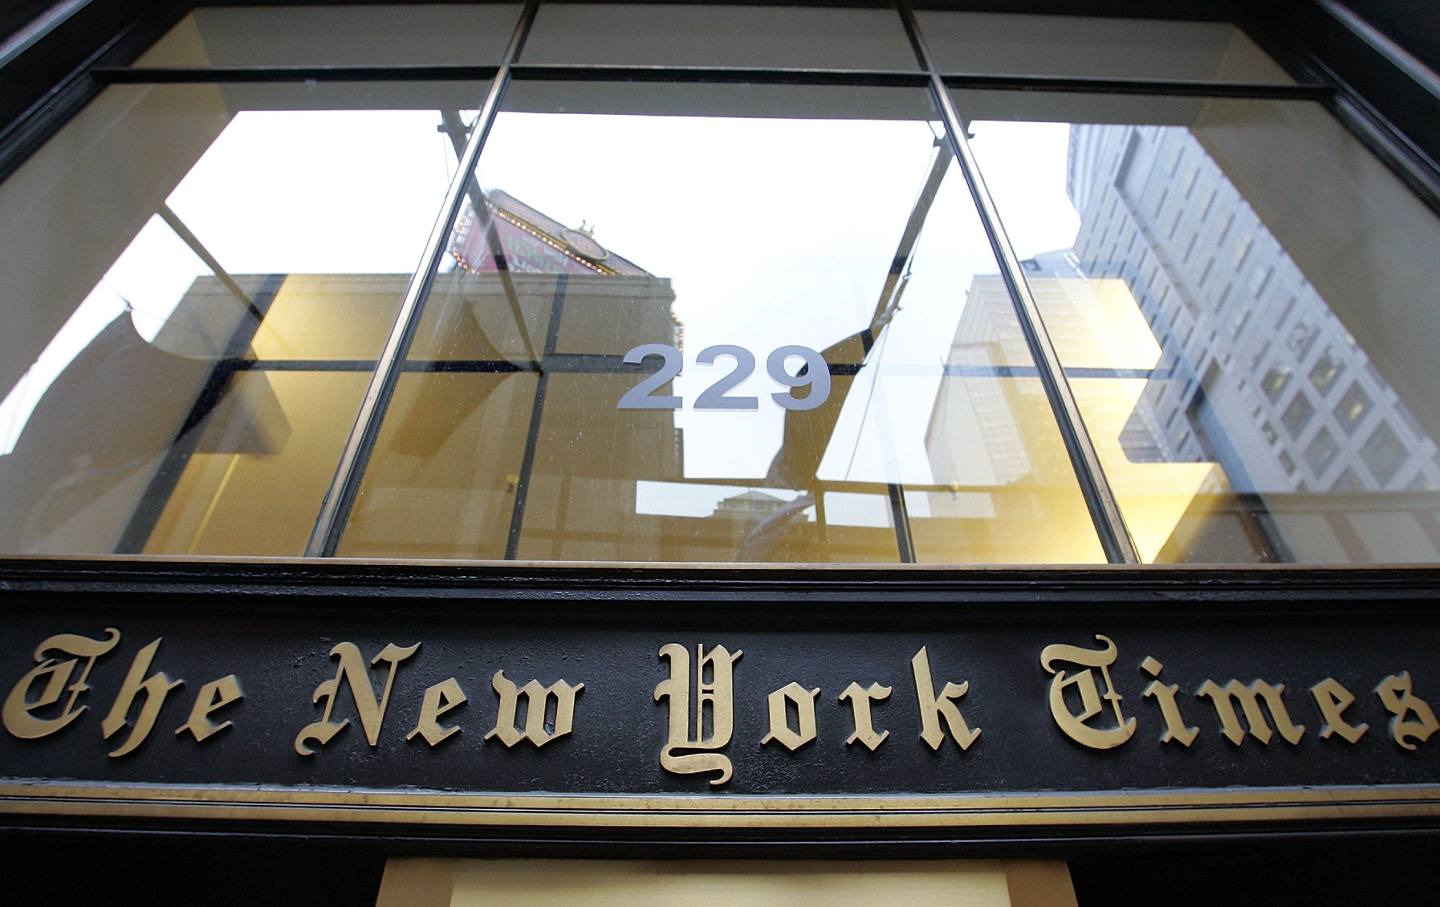 “The New York Times” Is Repeating One of Its Most Notorious Mistakes